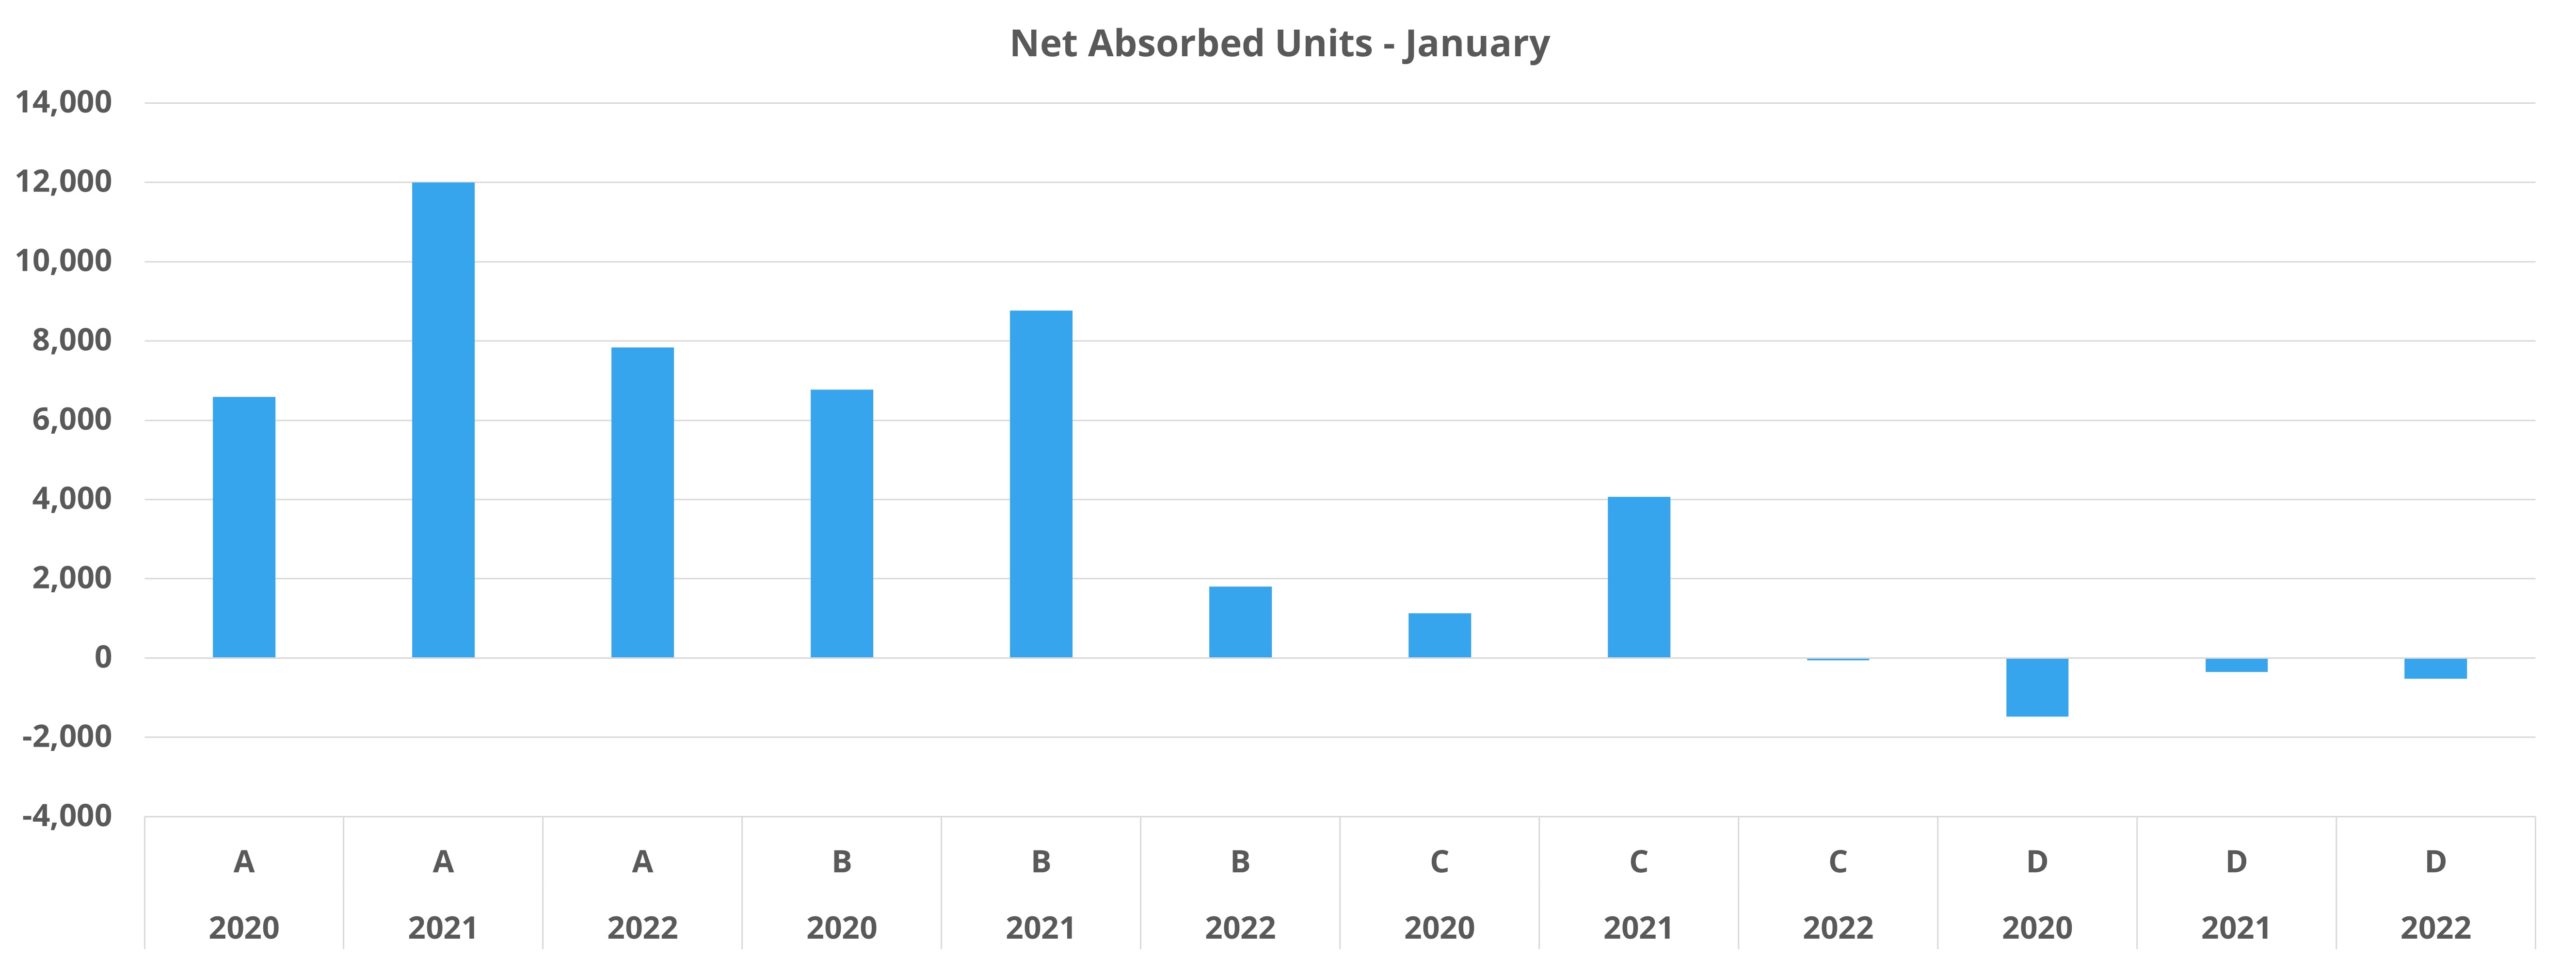 Net Absorbed Units - January